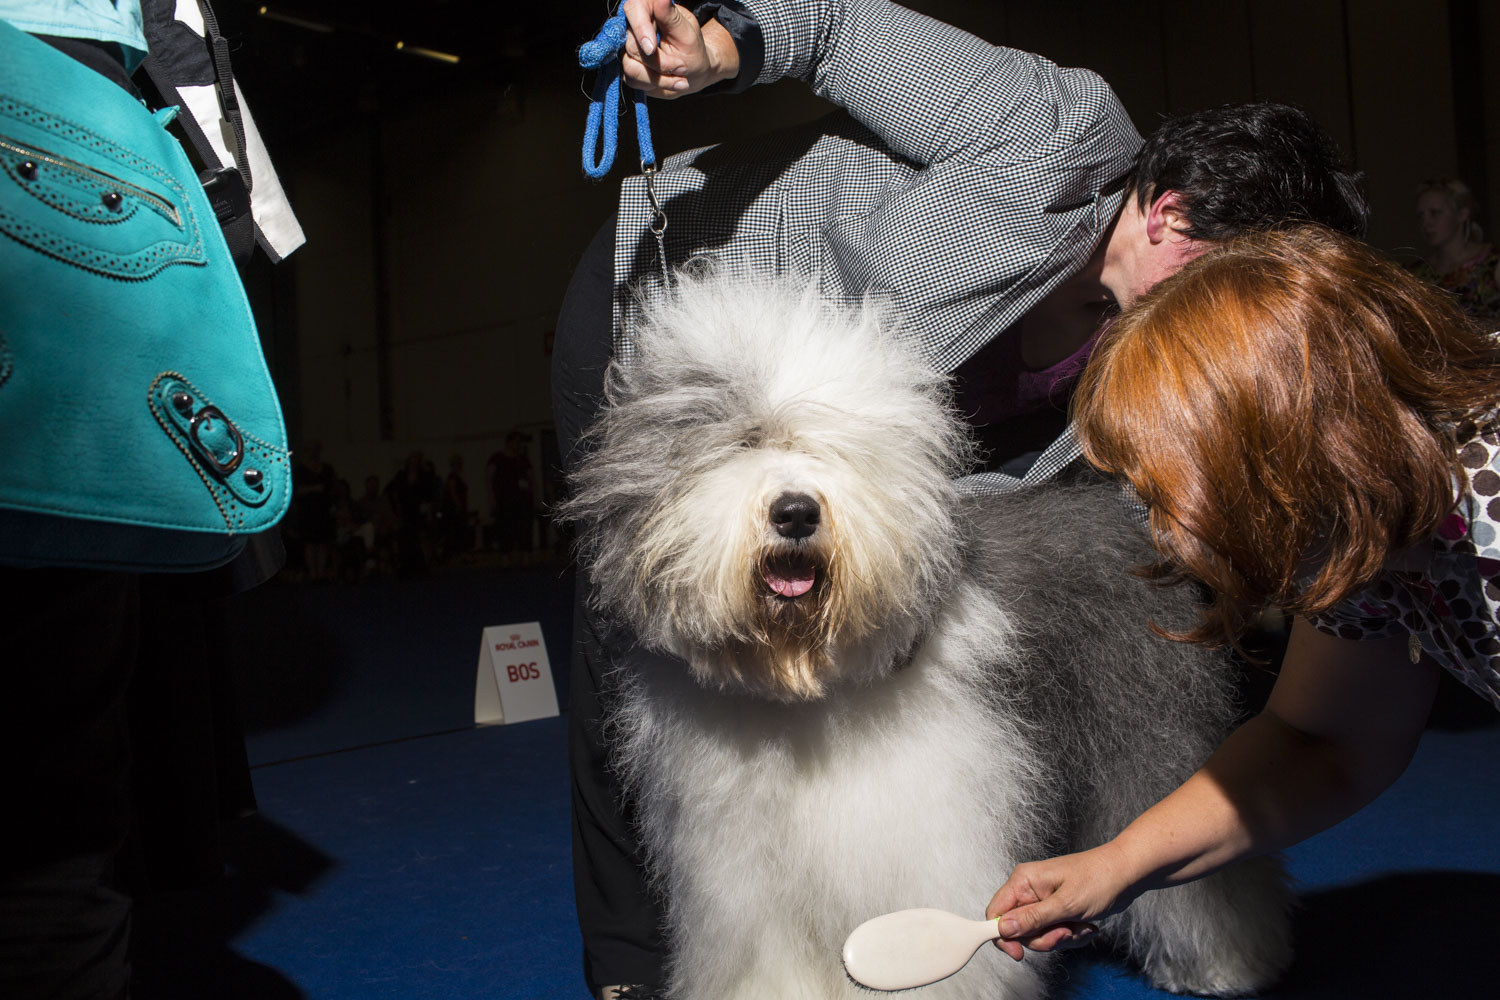 Aug. 10, 2014. Nancy, a 3 year old female Old English Sheepdog is prepped for the official winning photo by her handler Elisabeth Antl, top, from Austria, and an assistant, after winning Best of Breed during the 2014 World Dog Show, in Helsinki, Finland.